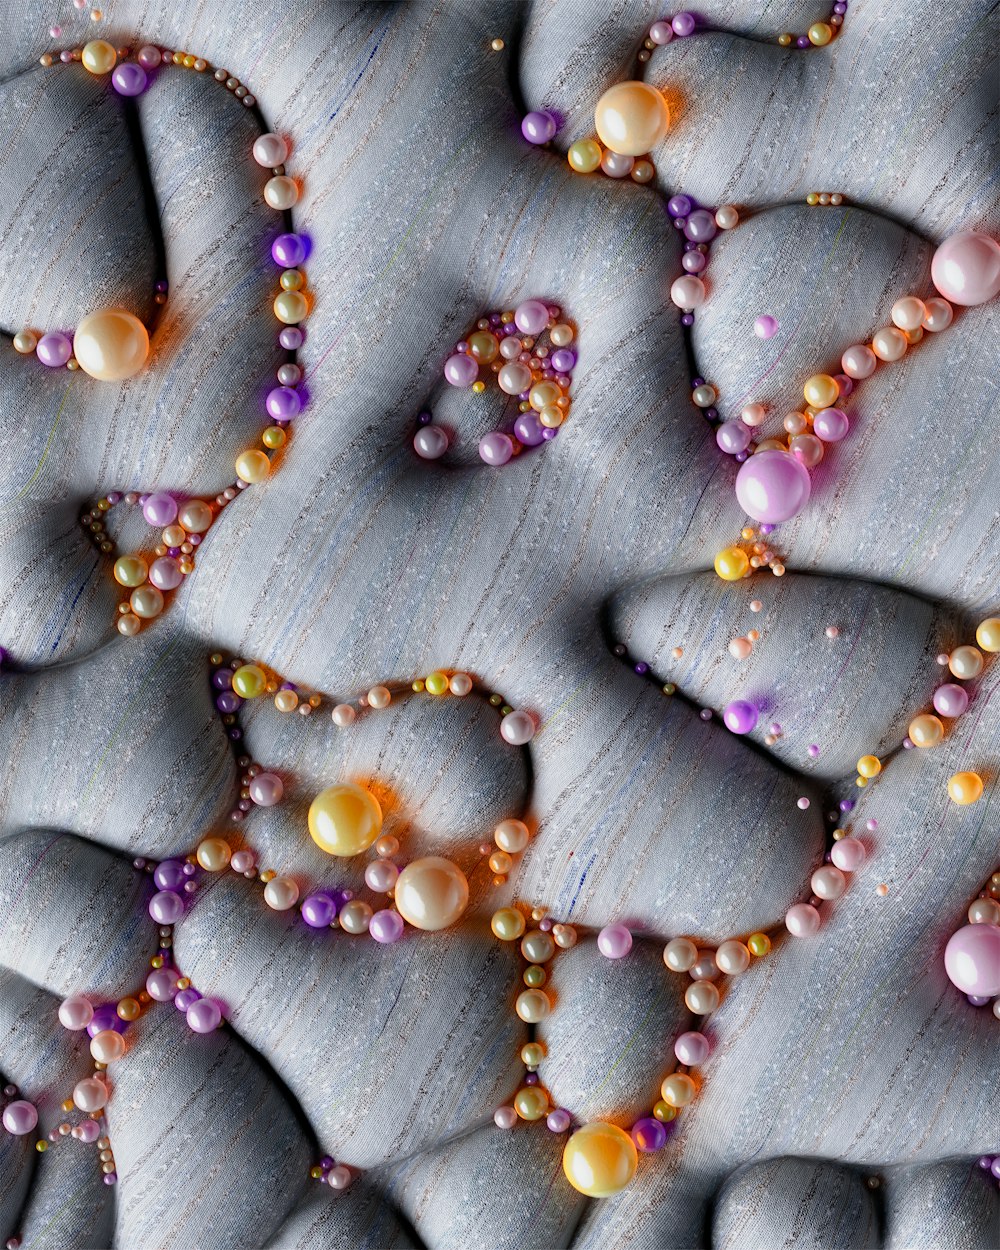 a close up of beads and beads on a surface